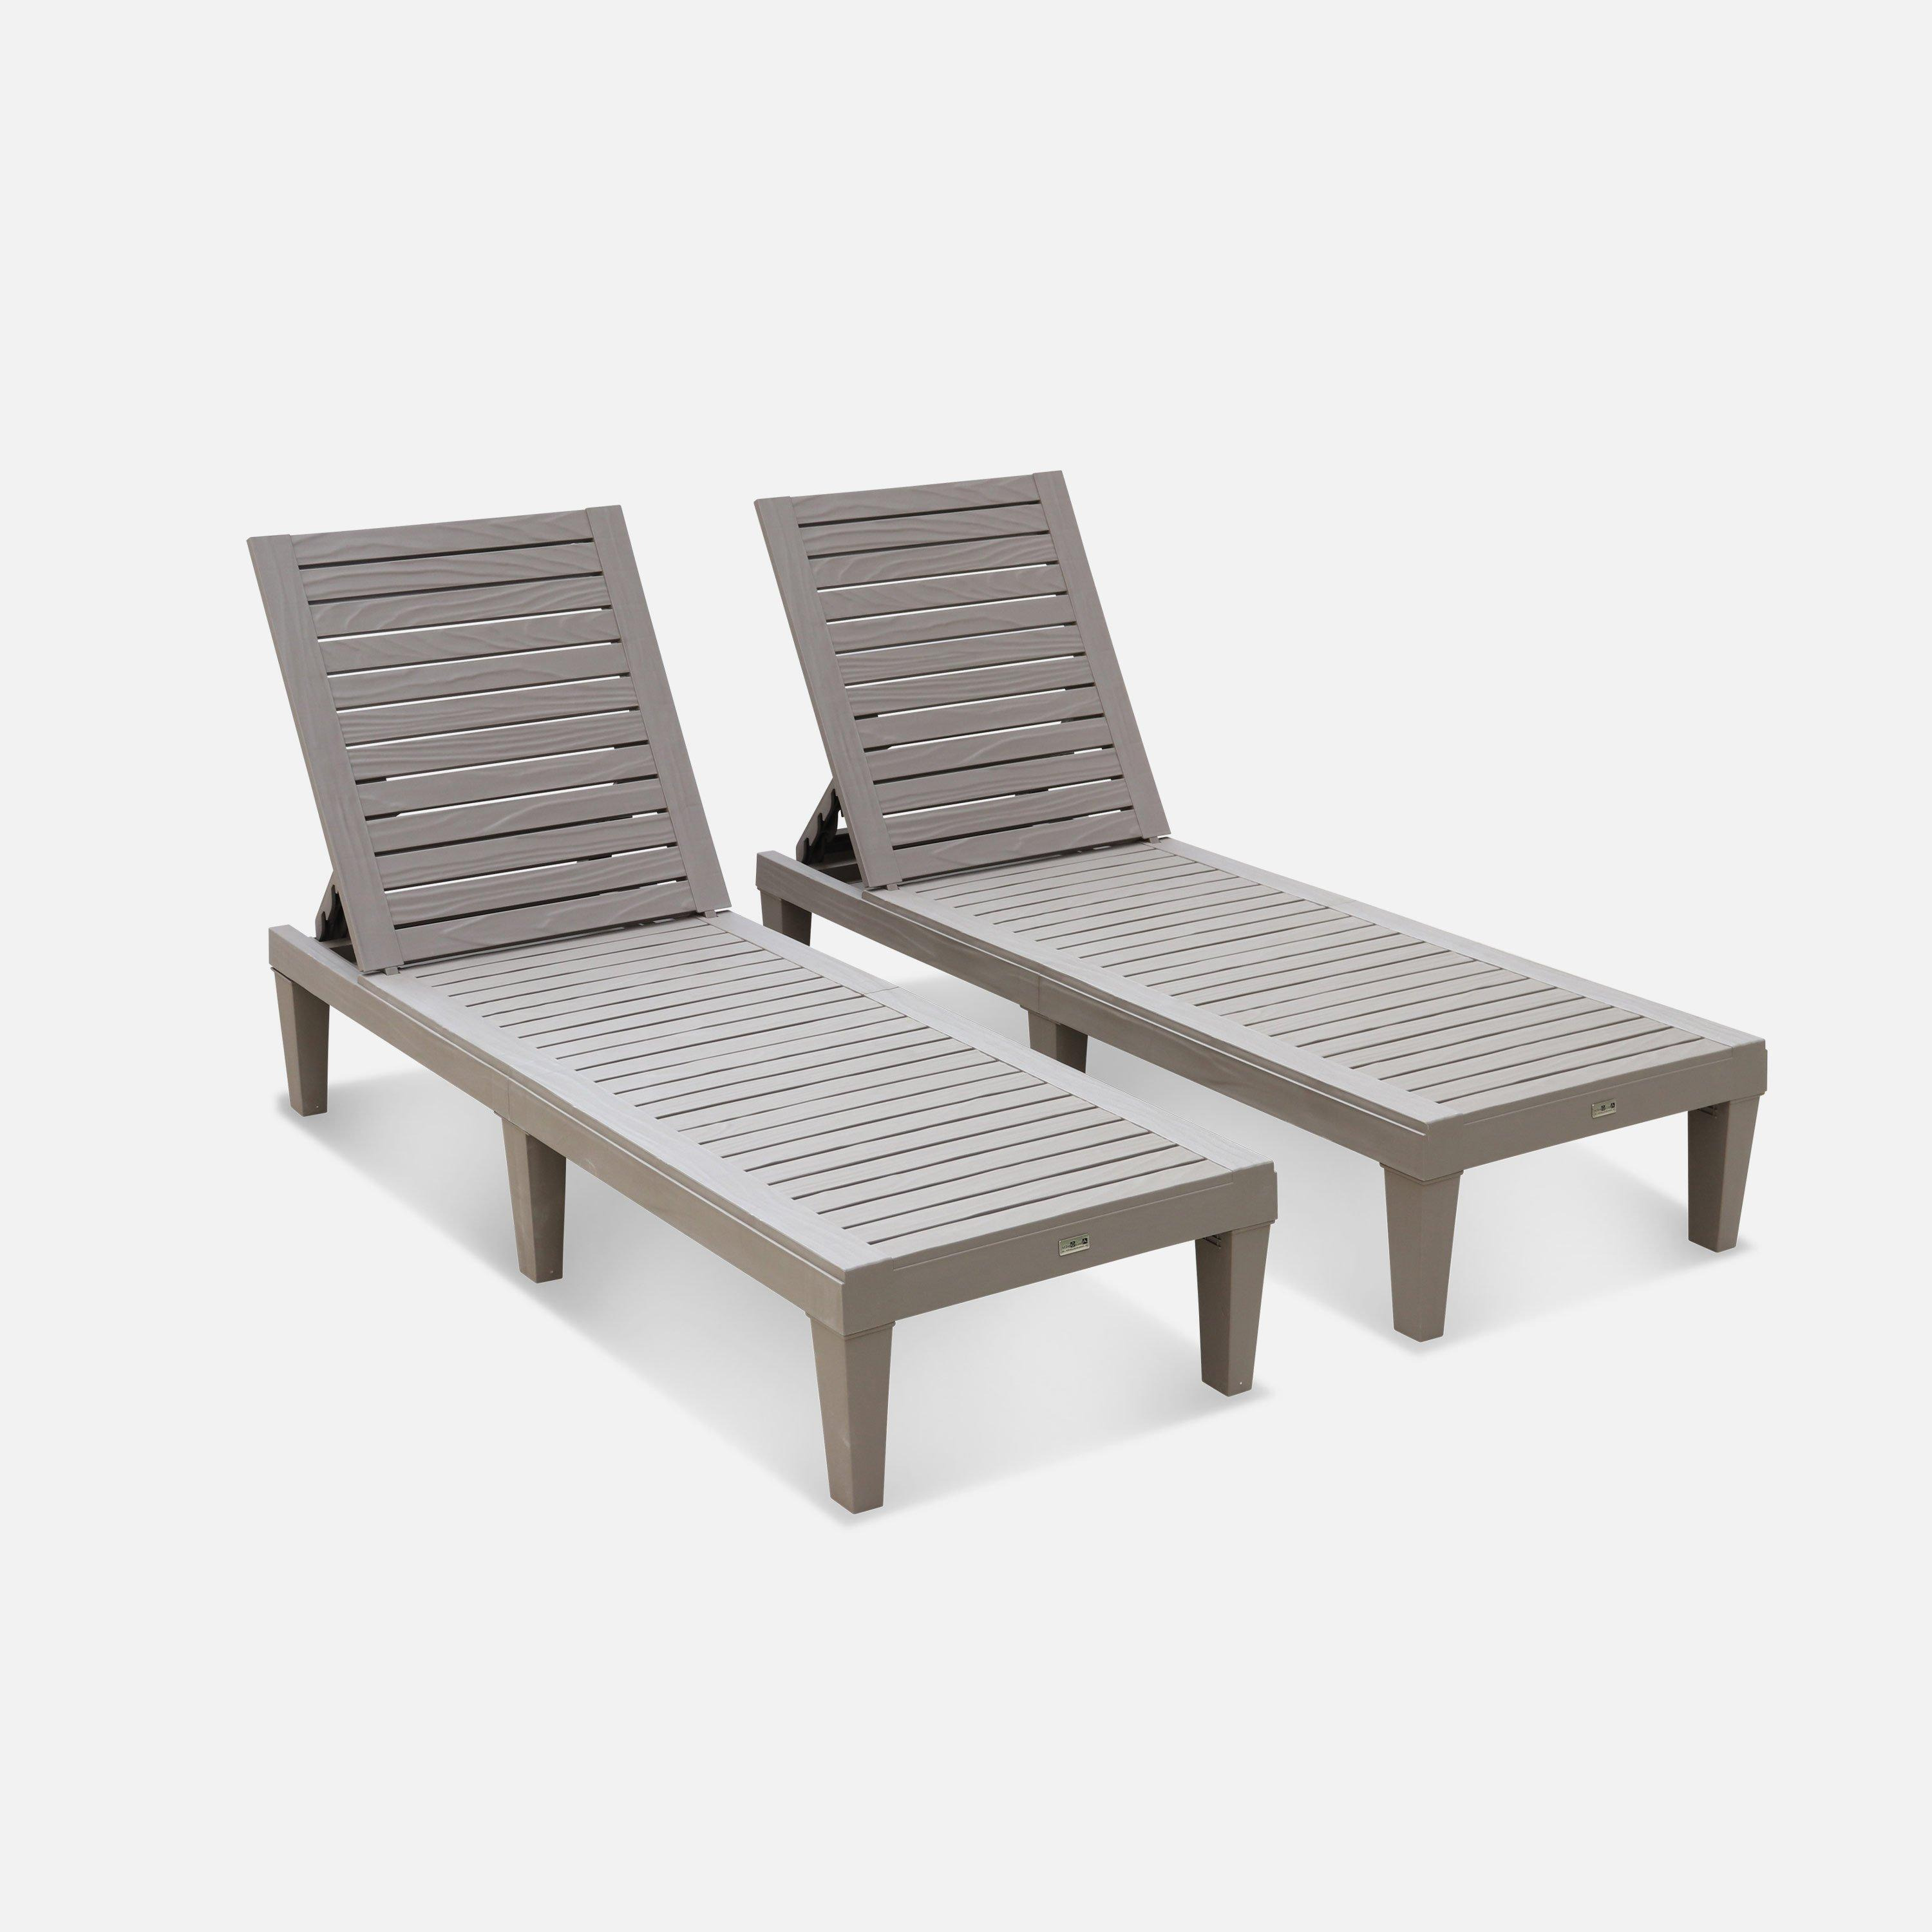 Pair Of Plastic Loungers With Textured Wood Effect - image 1